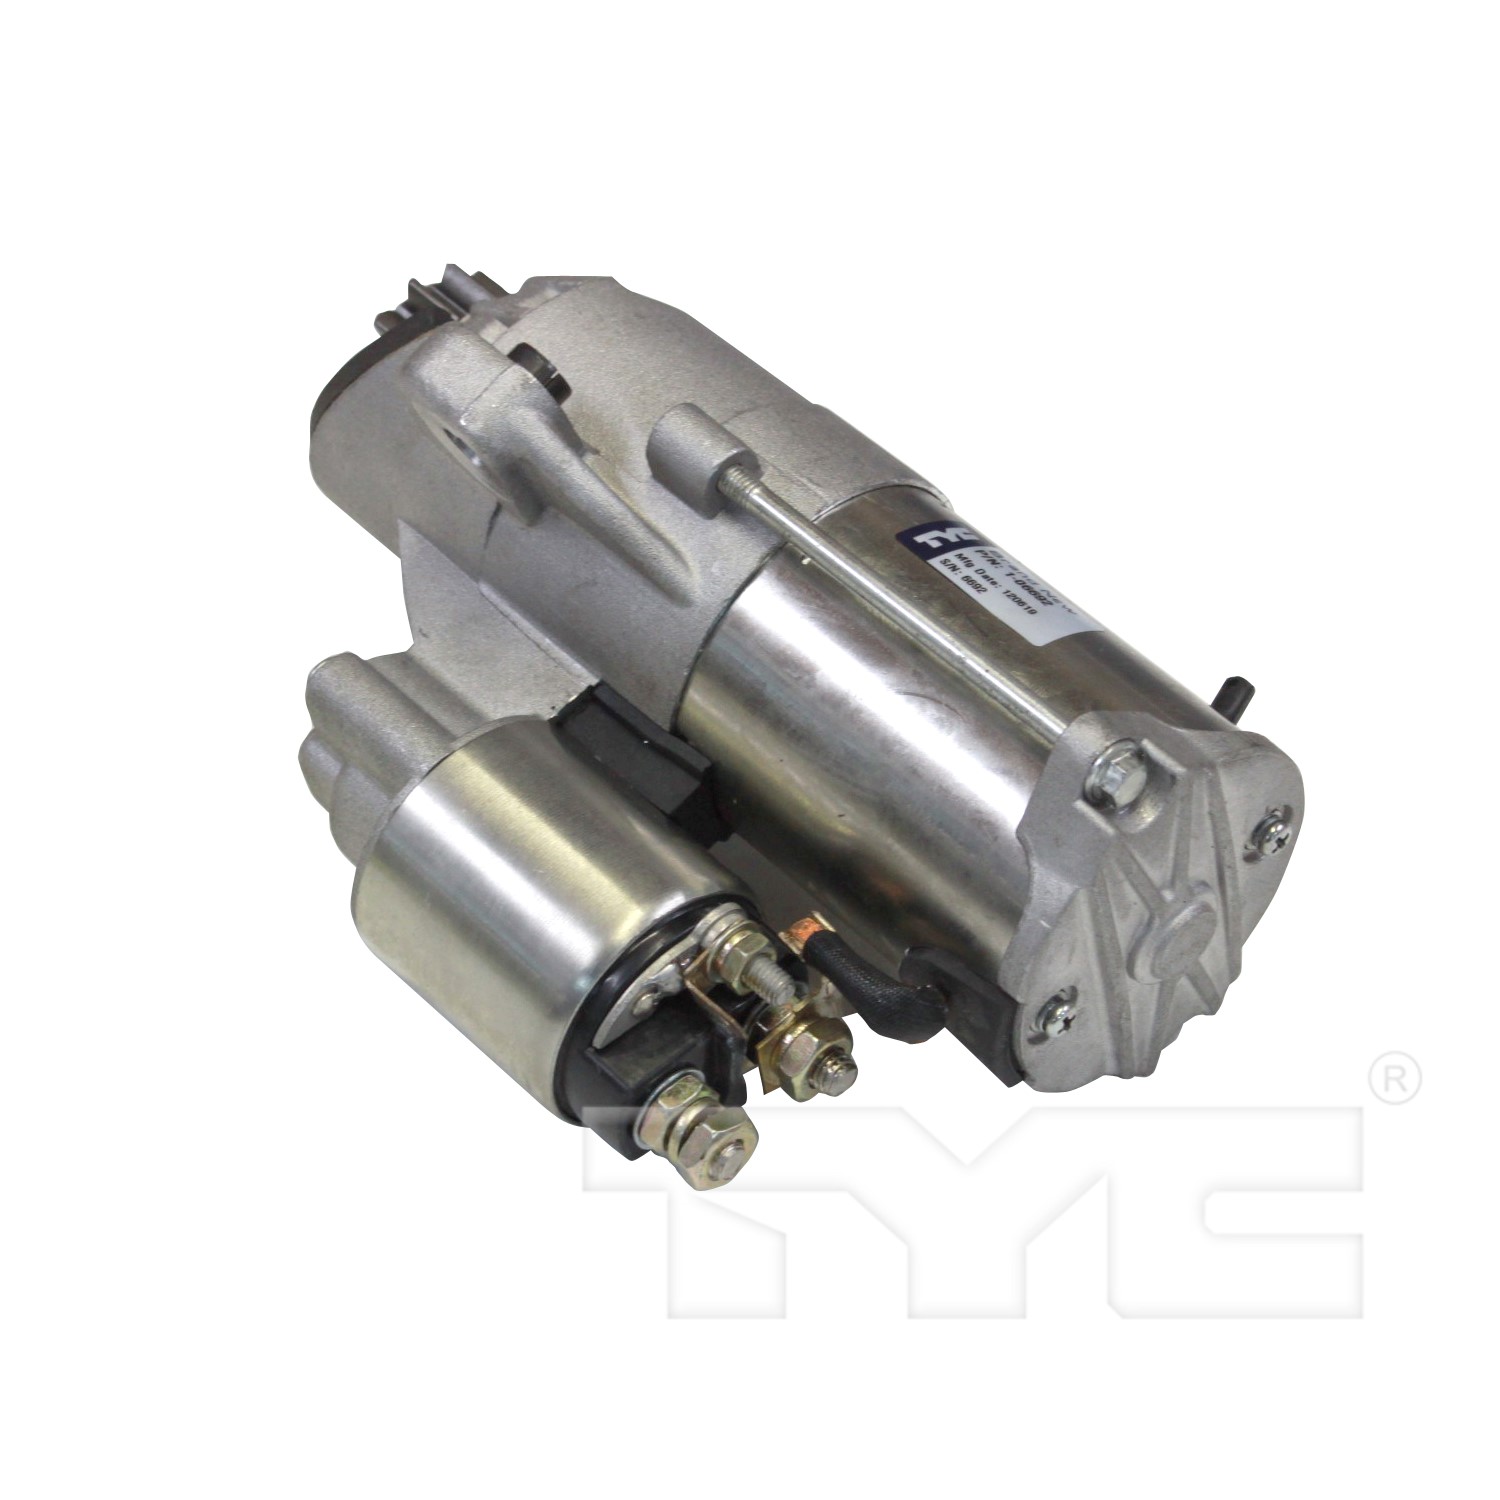 TYC-1-06692_NEW TYC STARER 12V 10T CCW PMGR FORD PMGR